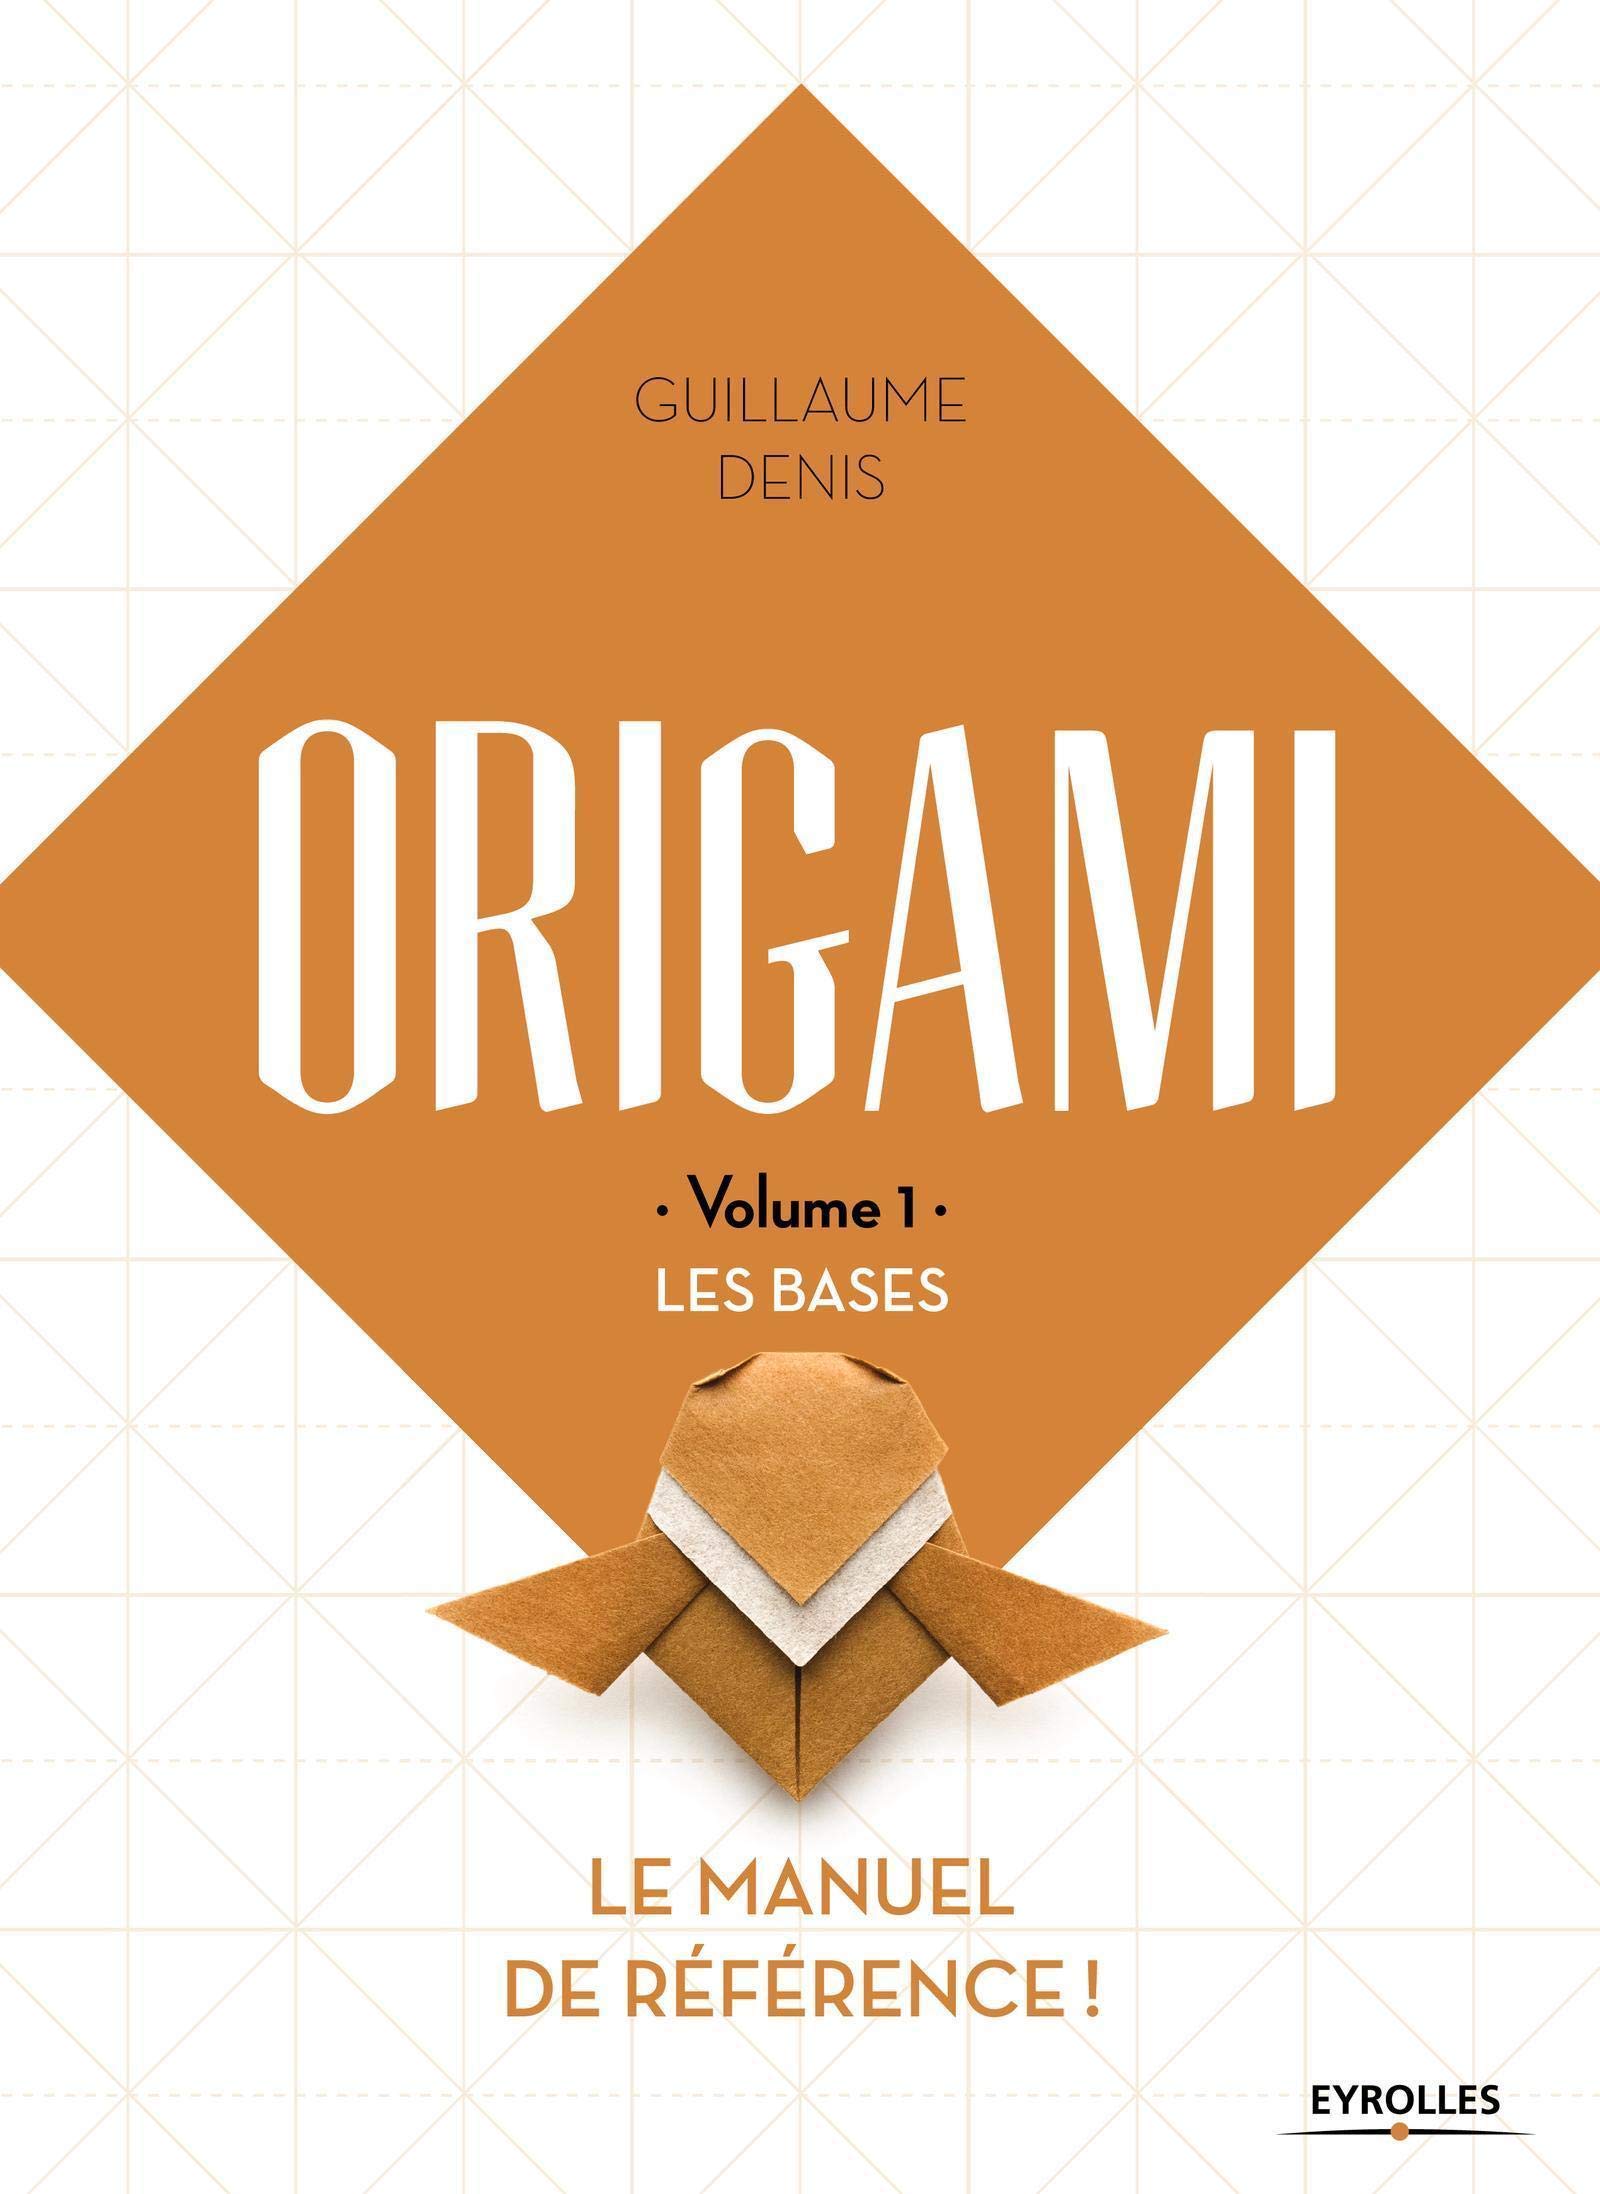 ORIGAMI - Volume 1 - LES BASES : page 158.